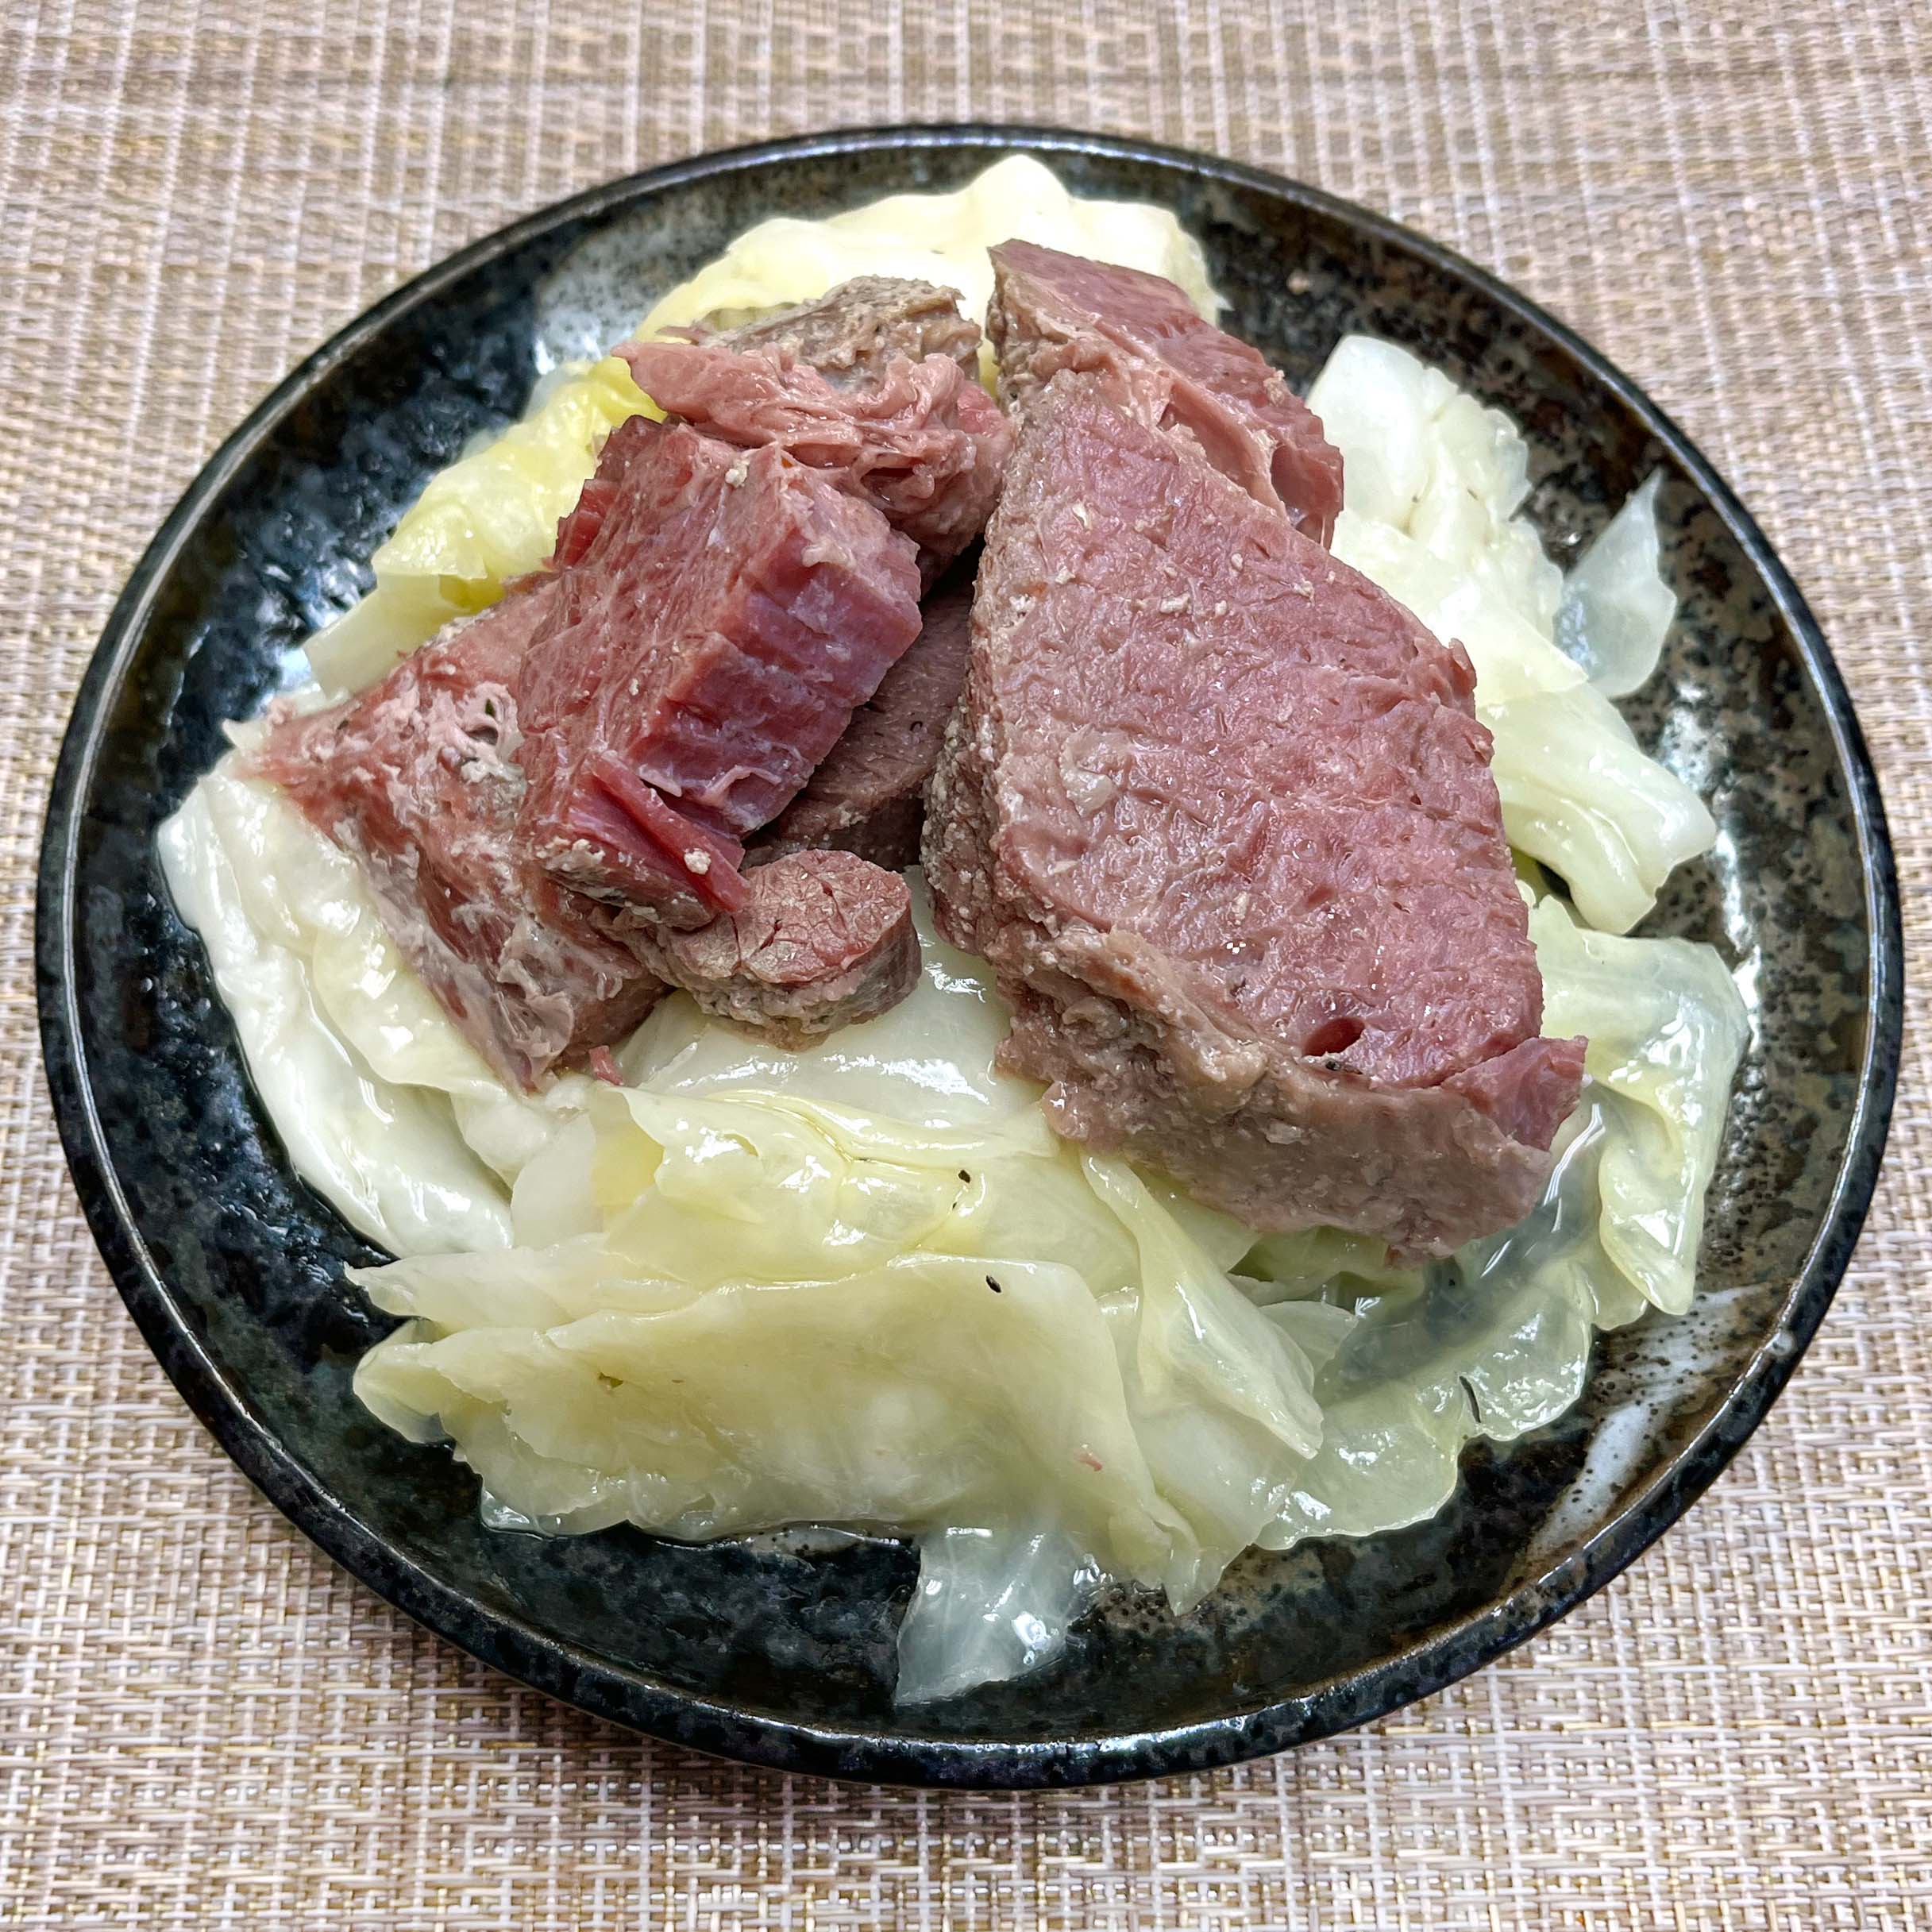 FR CORNED BEEF W/ CABBAGE